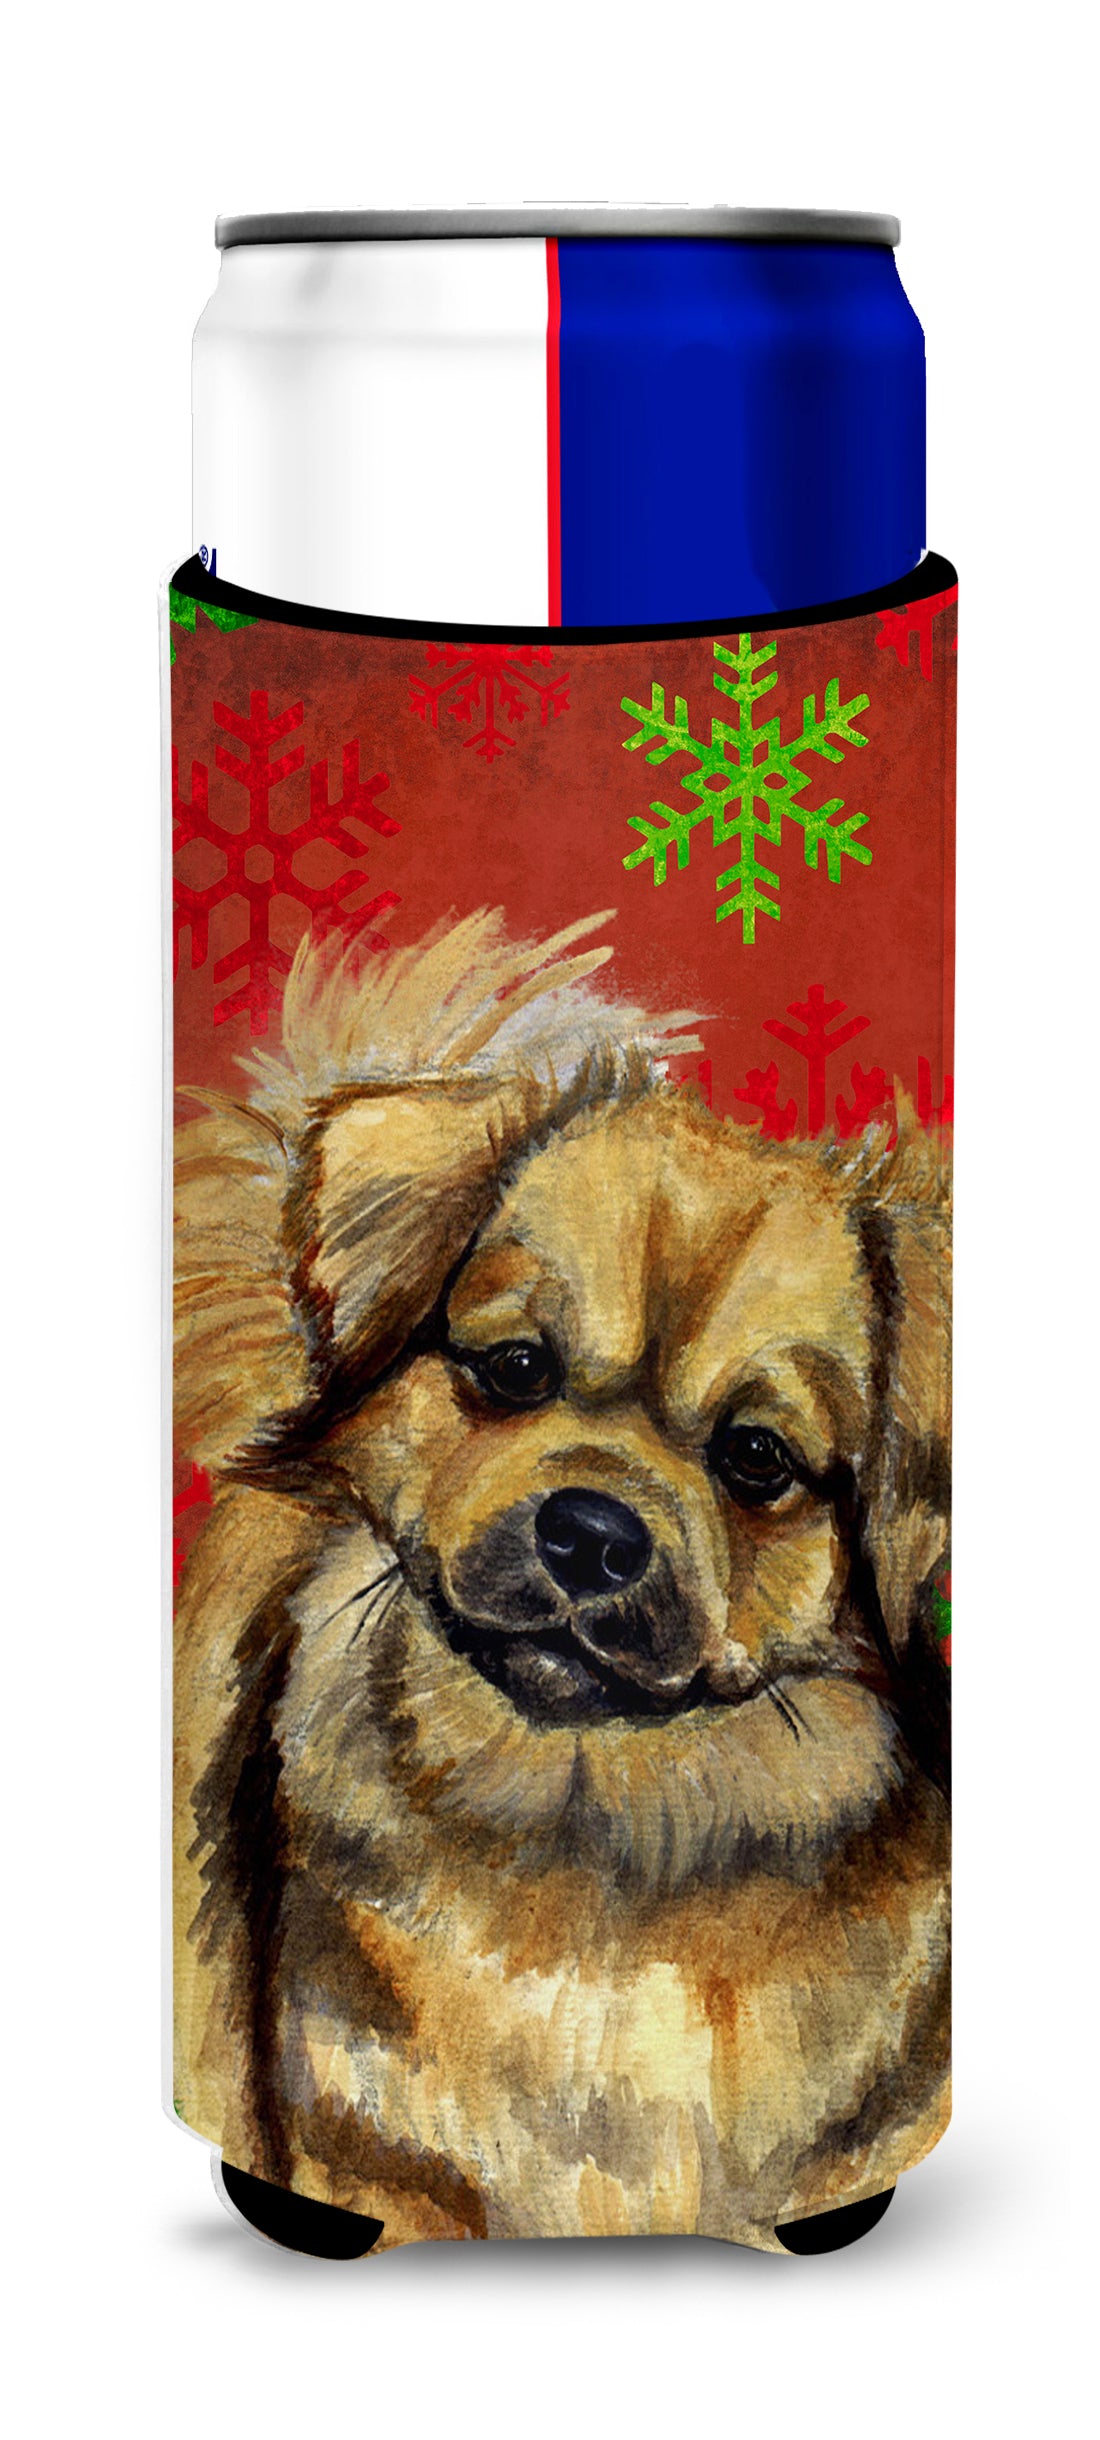 Tibetan Spaniel Red Green Snowflake Holiday Christmas Ultra Beverage Insulators for slim cans LH9349MUK.